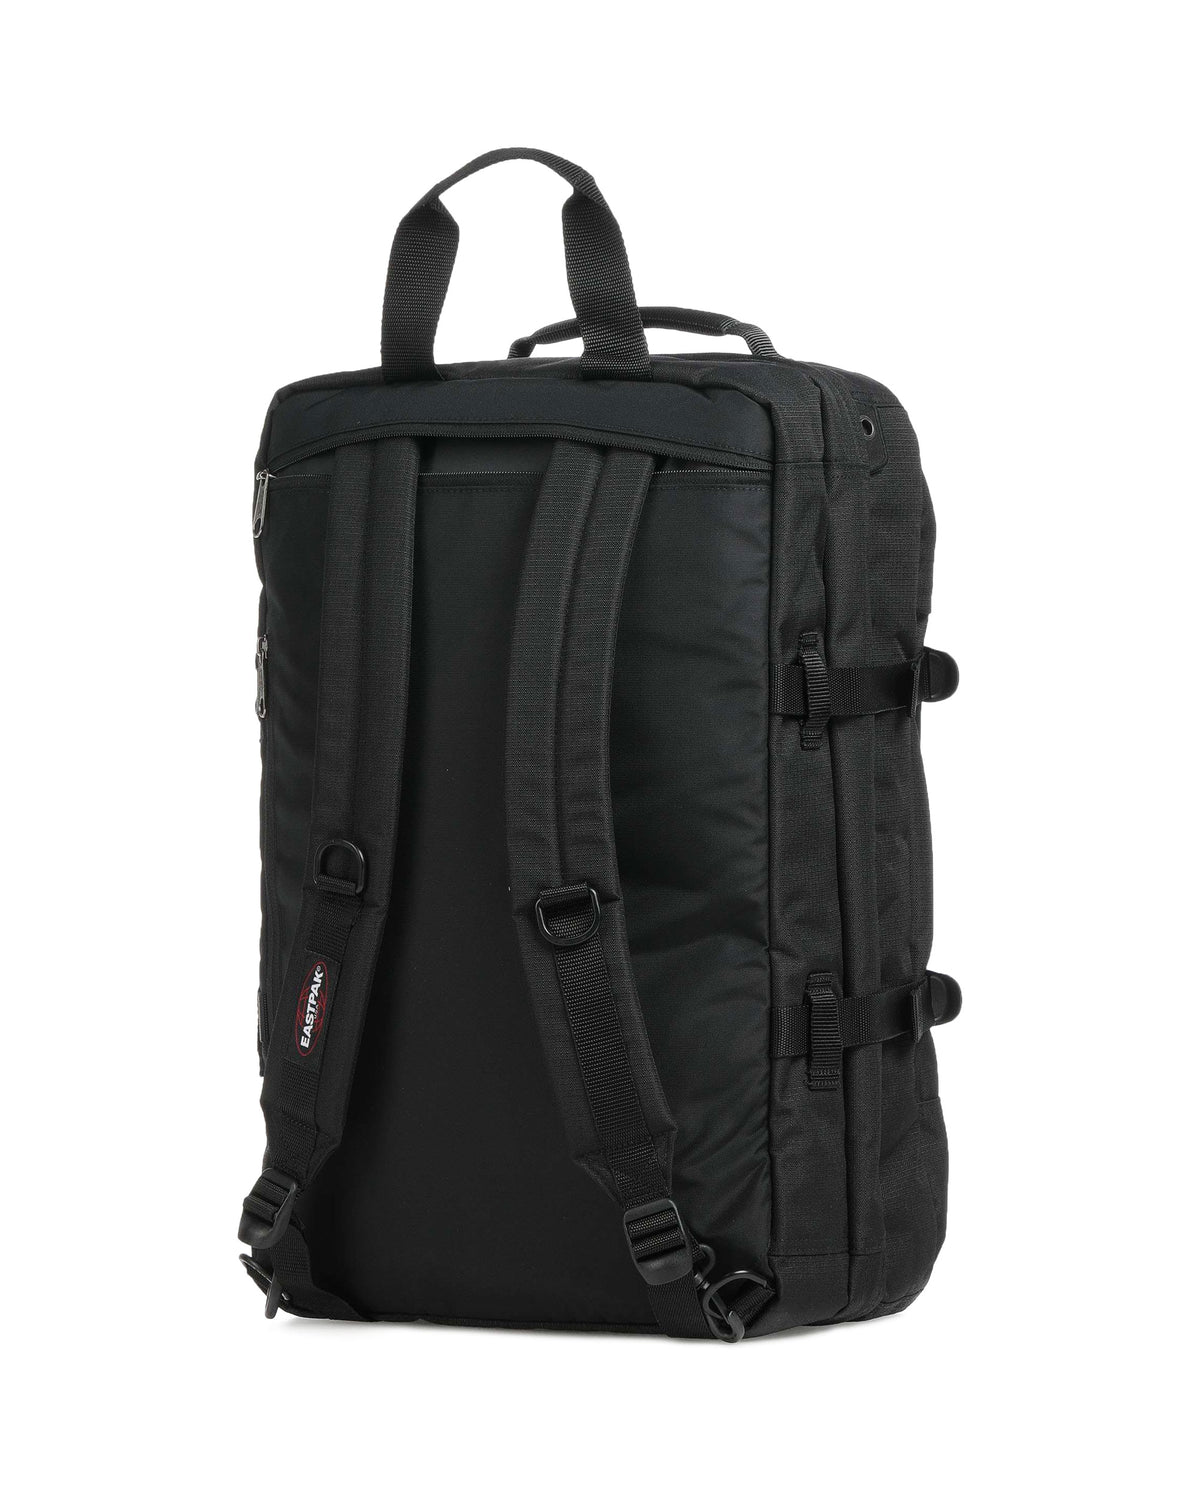 Eastpak Travelpack Camp Patch Nero